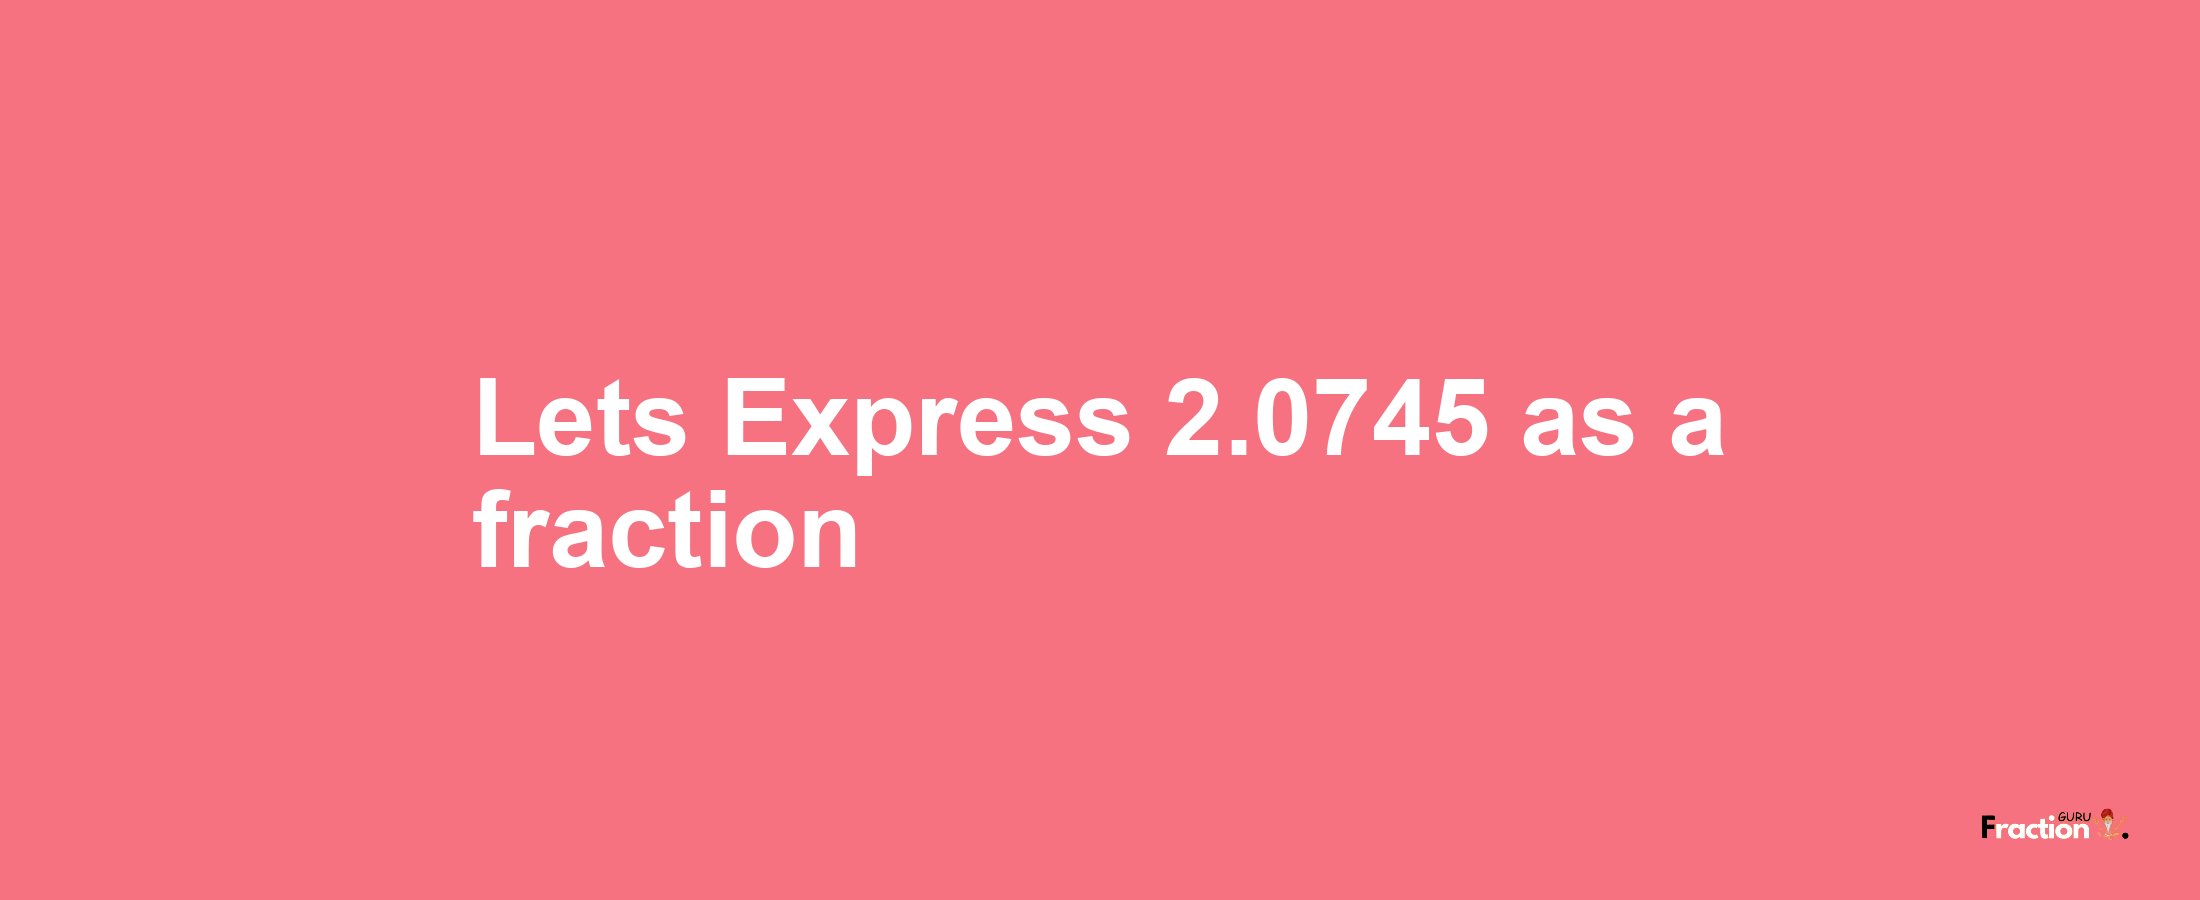 Lets Express 2.0745 as afraction